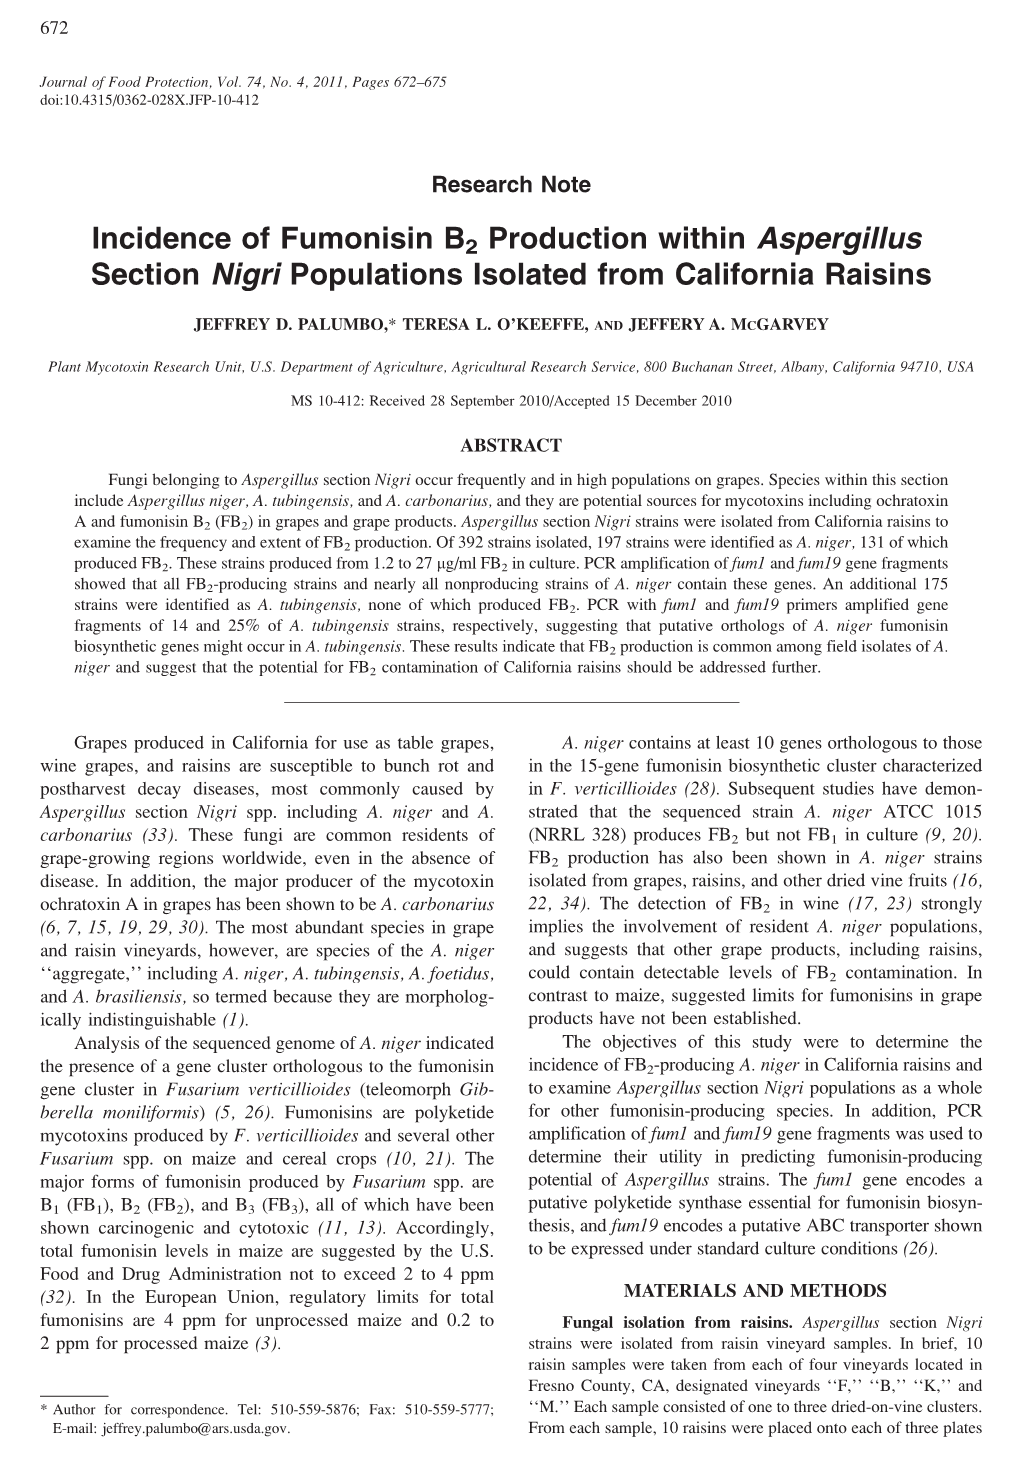 Incidence of Fumonisin B2 Production Within Aspergillus Section Nigri Populations Isolated from California Raisins